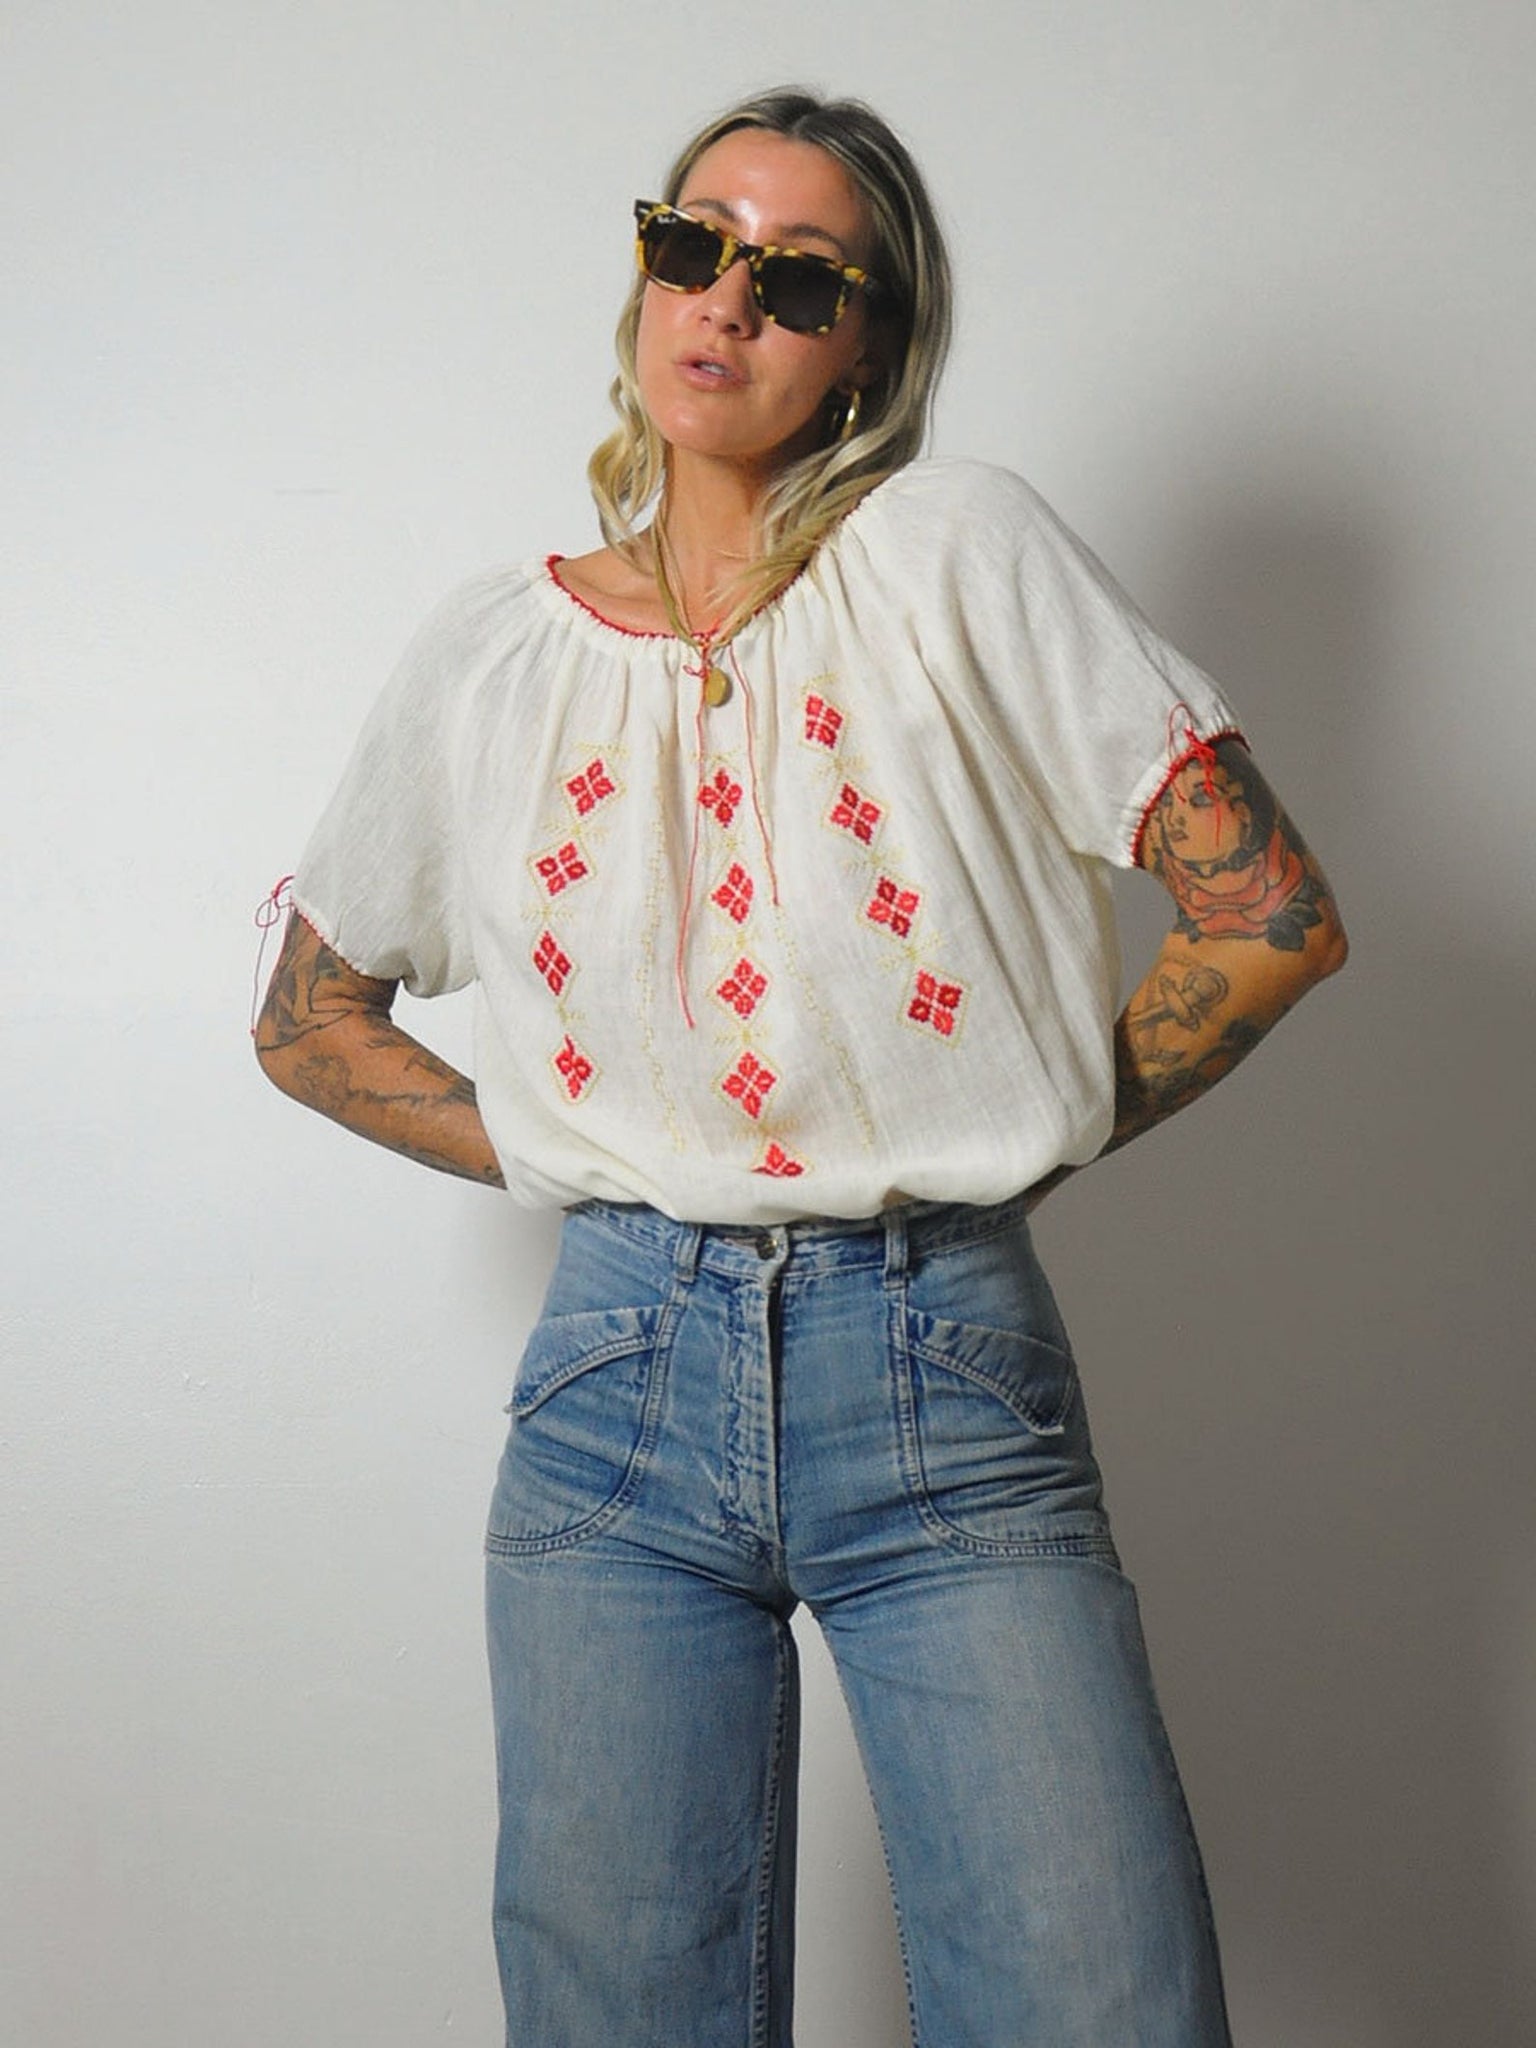 1970s Embroidered Muslin Blouse